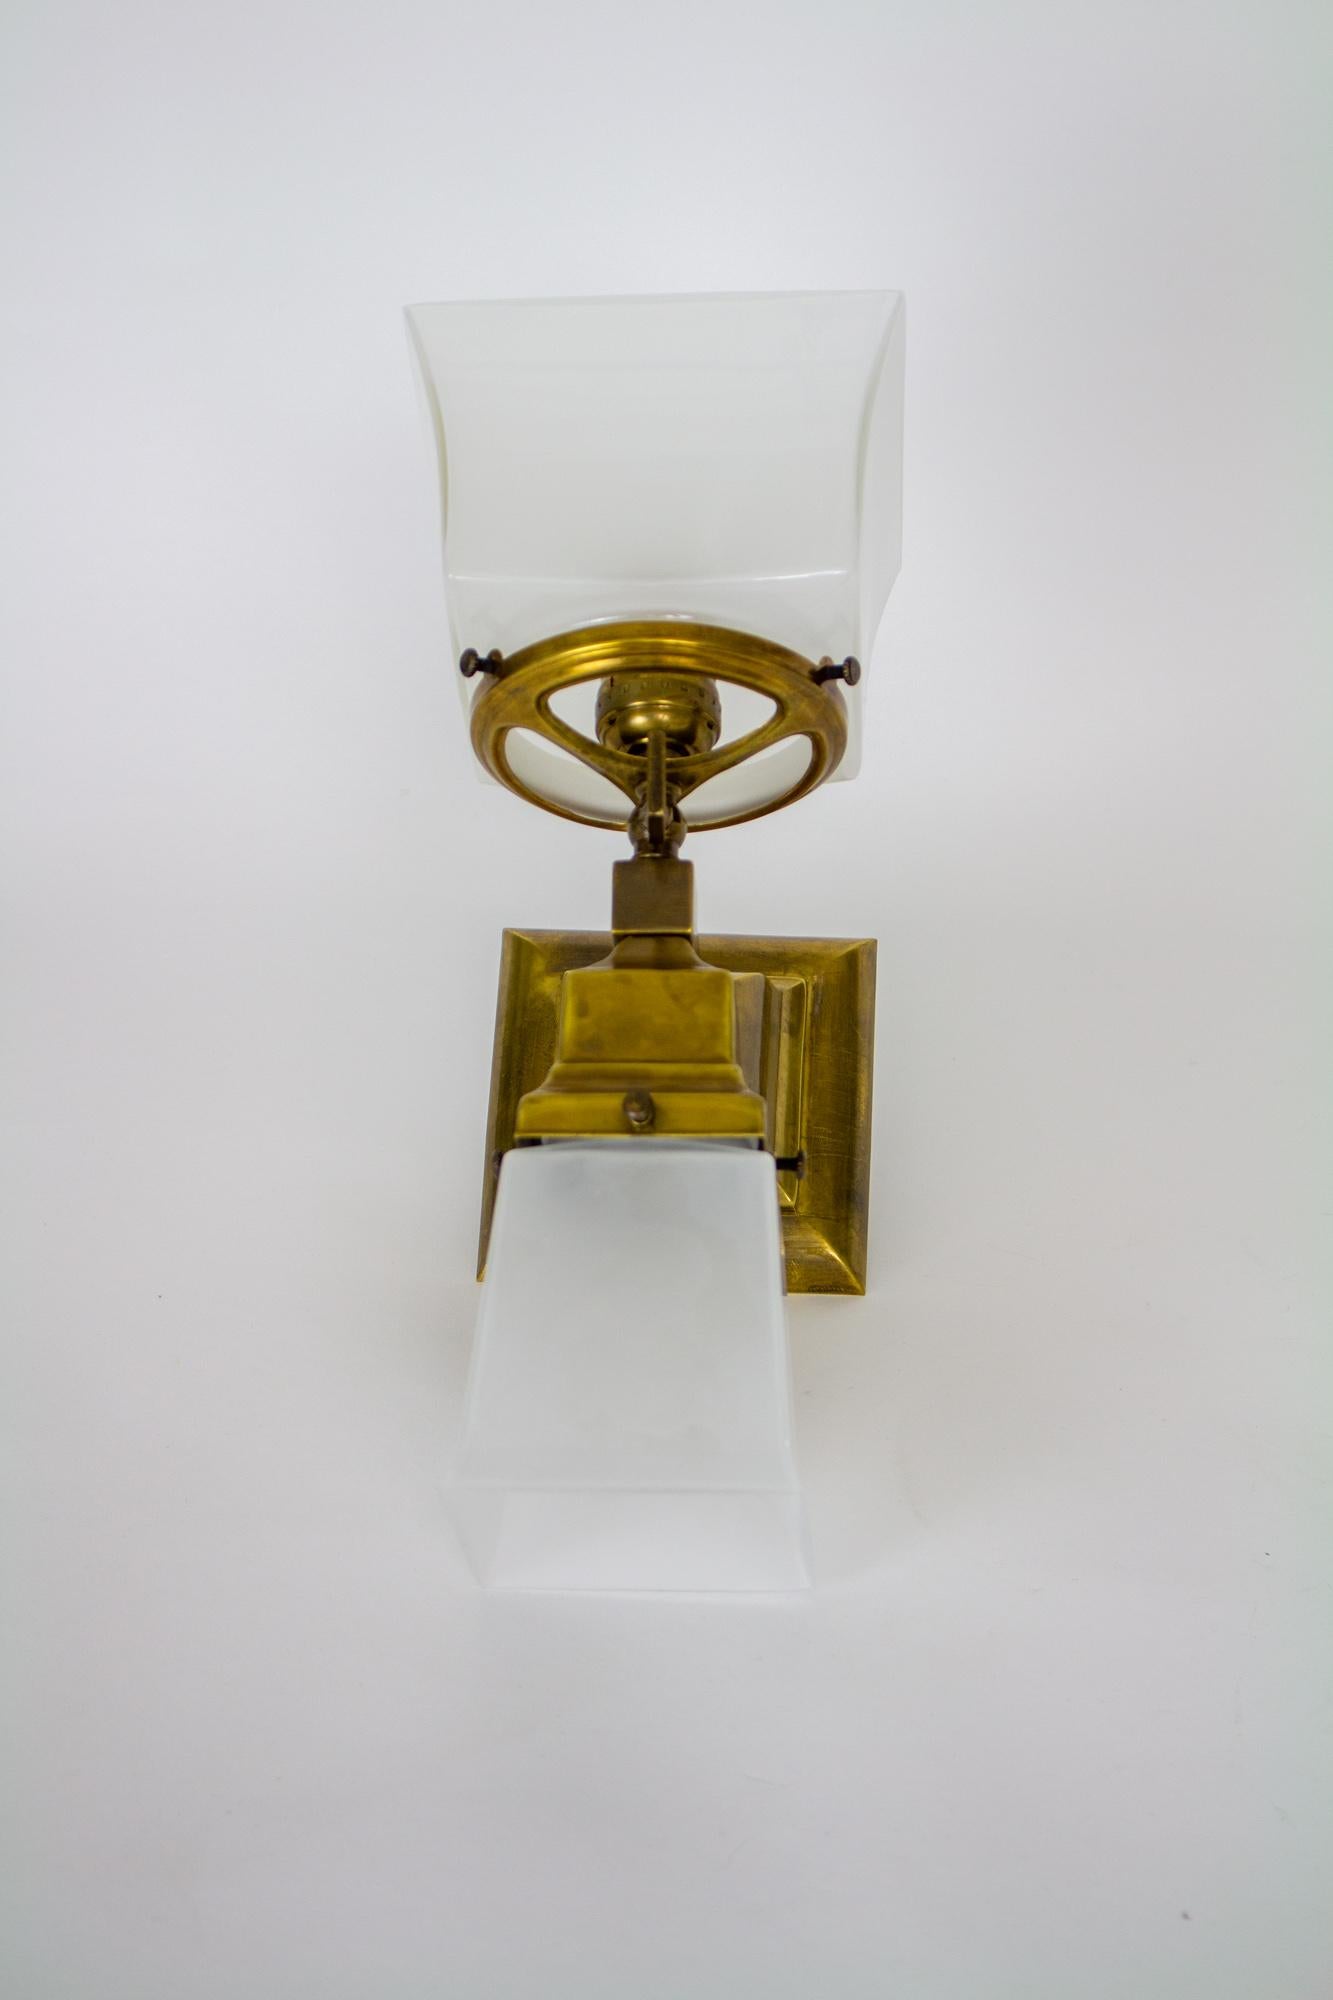 Classic squared Mission style sconces. Originally has gas jets facing upwards with 4” fitter shades, and electric lights facing downwards with 2 ¼” fitter shades. Backplates are 4.5” square. Gas elements have been converted to electric, maintaining